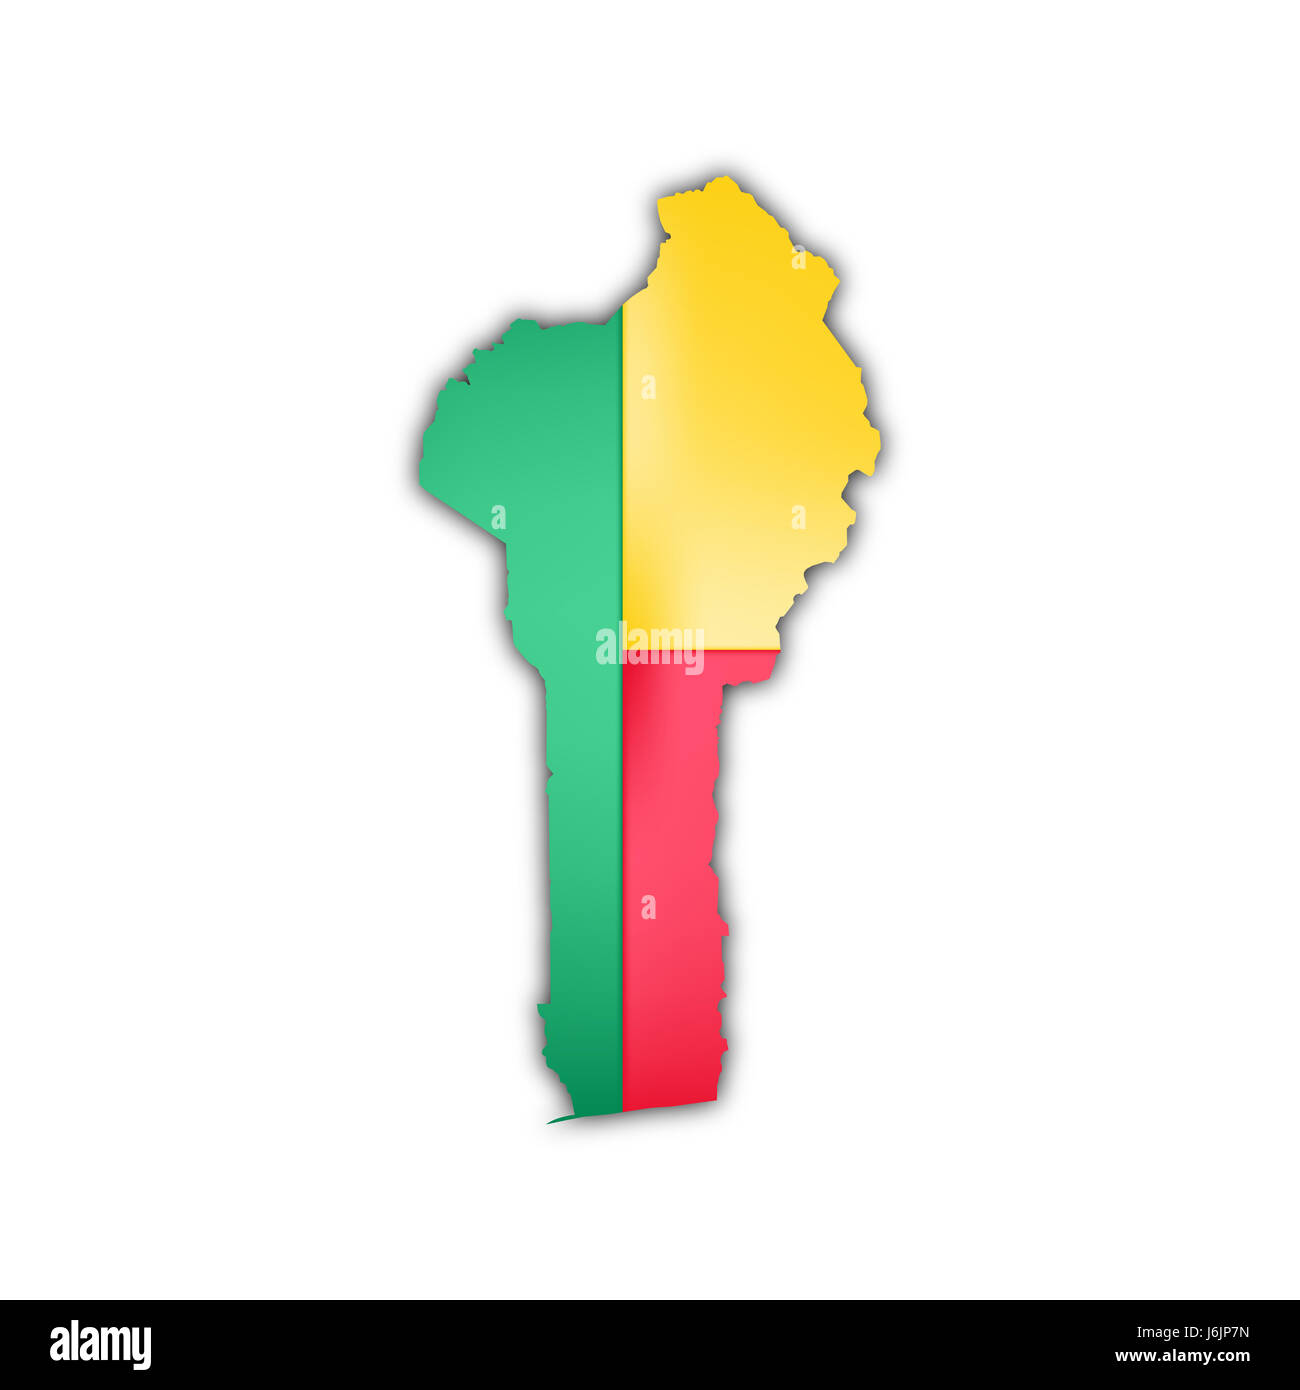 africa flag west country benin cartography map atlas map of the world travel Stock Photo